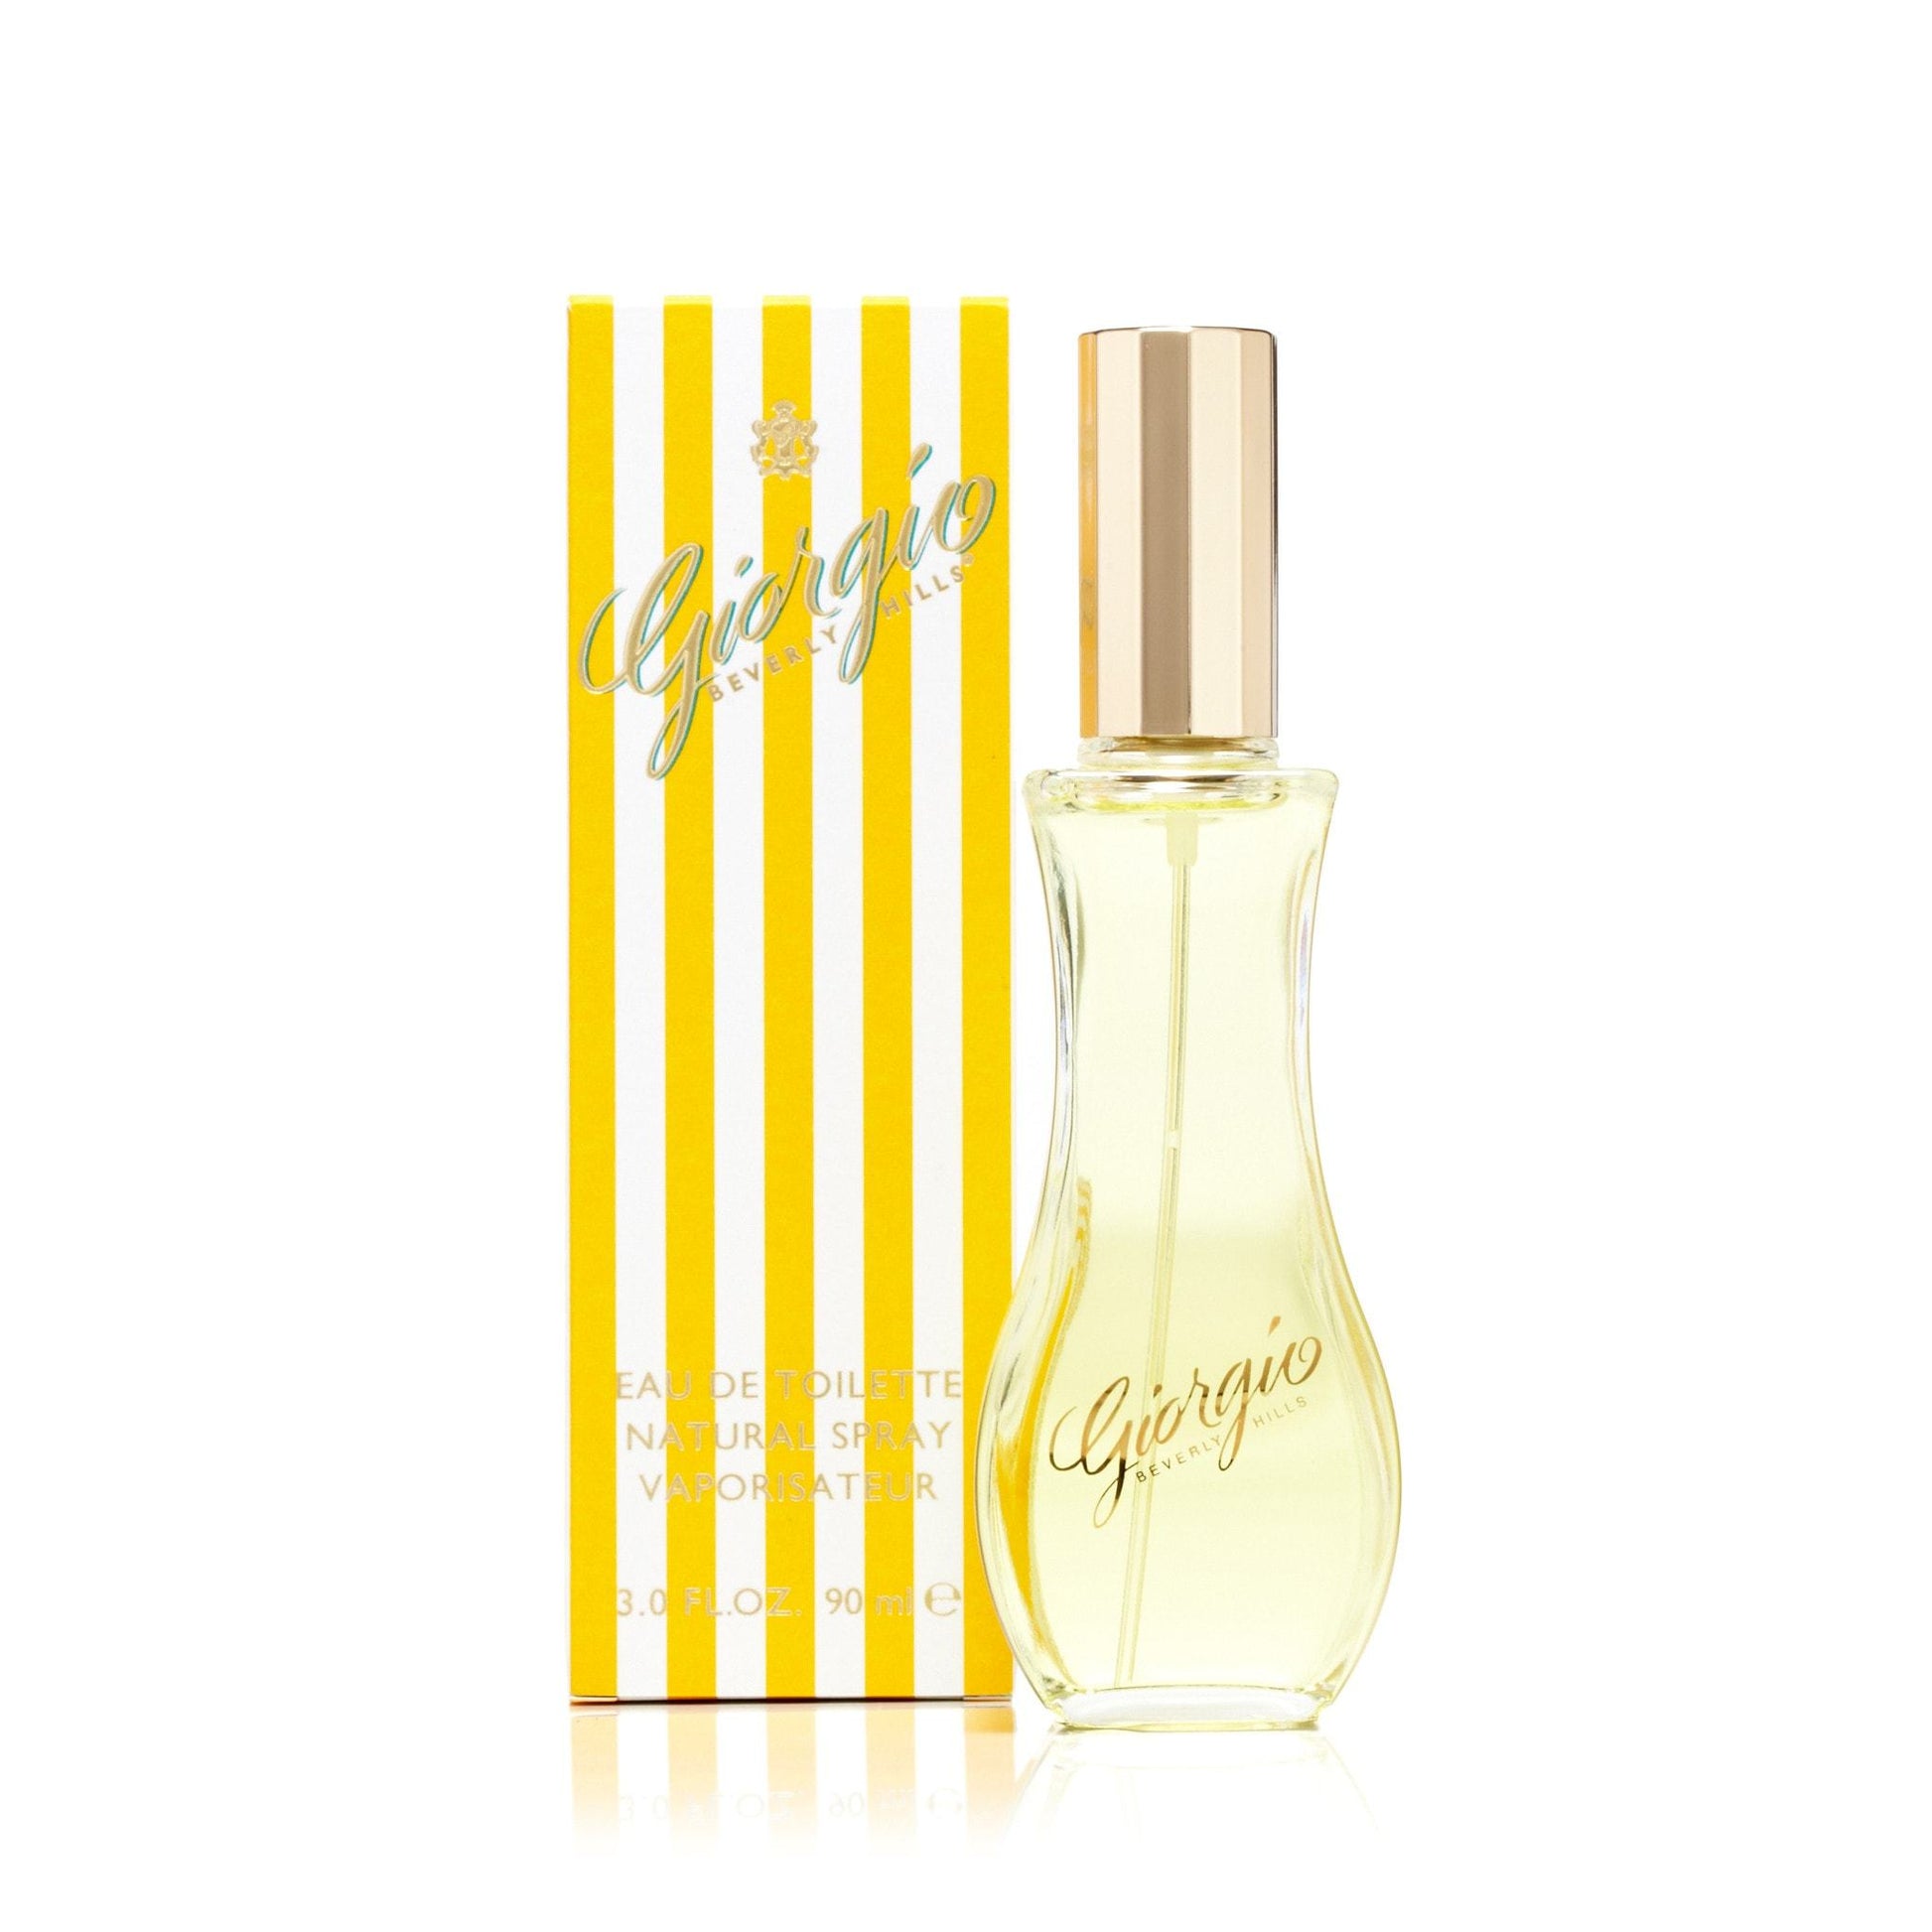 Giorgio Eau de Toilette Spray for Women by Beverly Hills, Product image 1